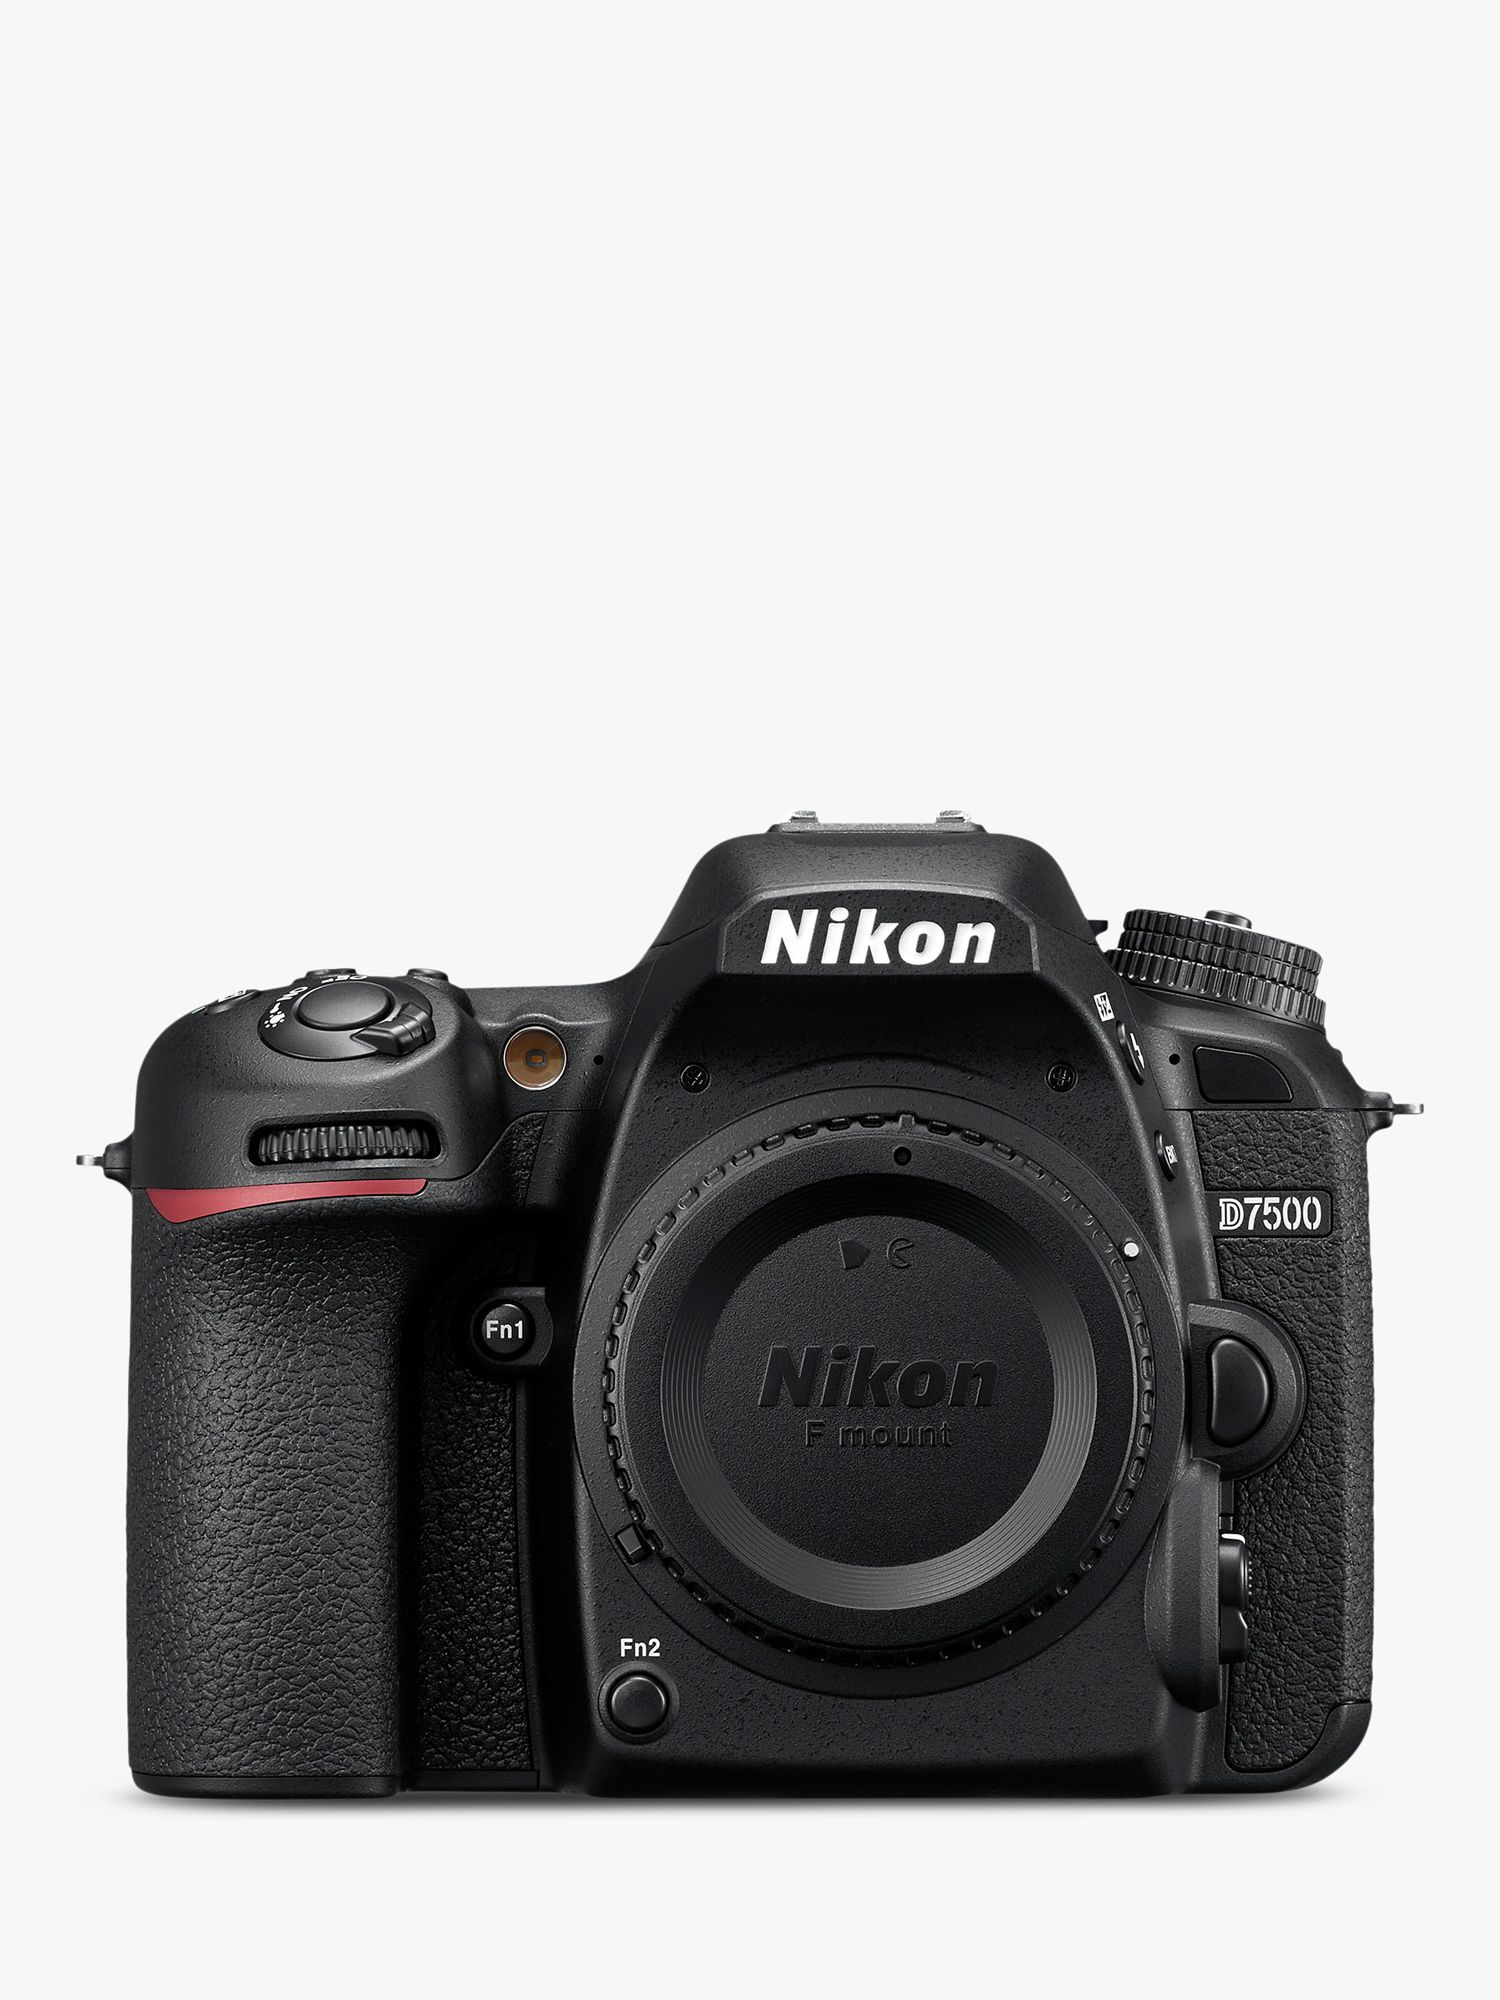 Image of Nikon D7500 DSLR Camera 209 MP 4K UHD WiFi Bluetooth 32 Tiltable Touch Screen Body Only Black